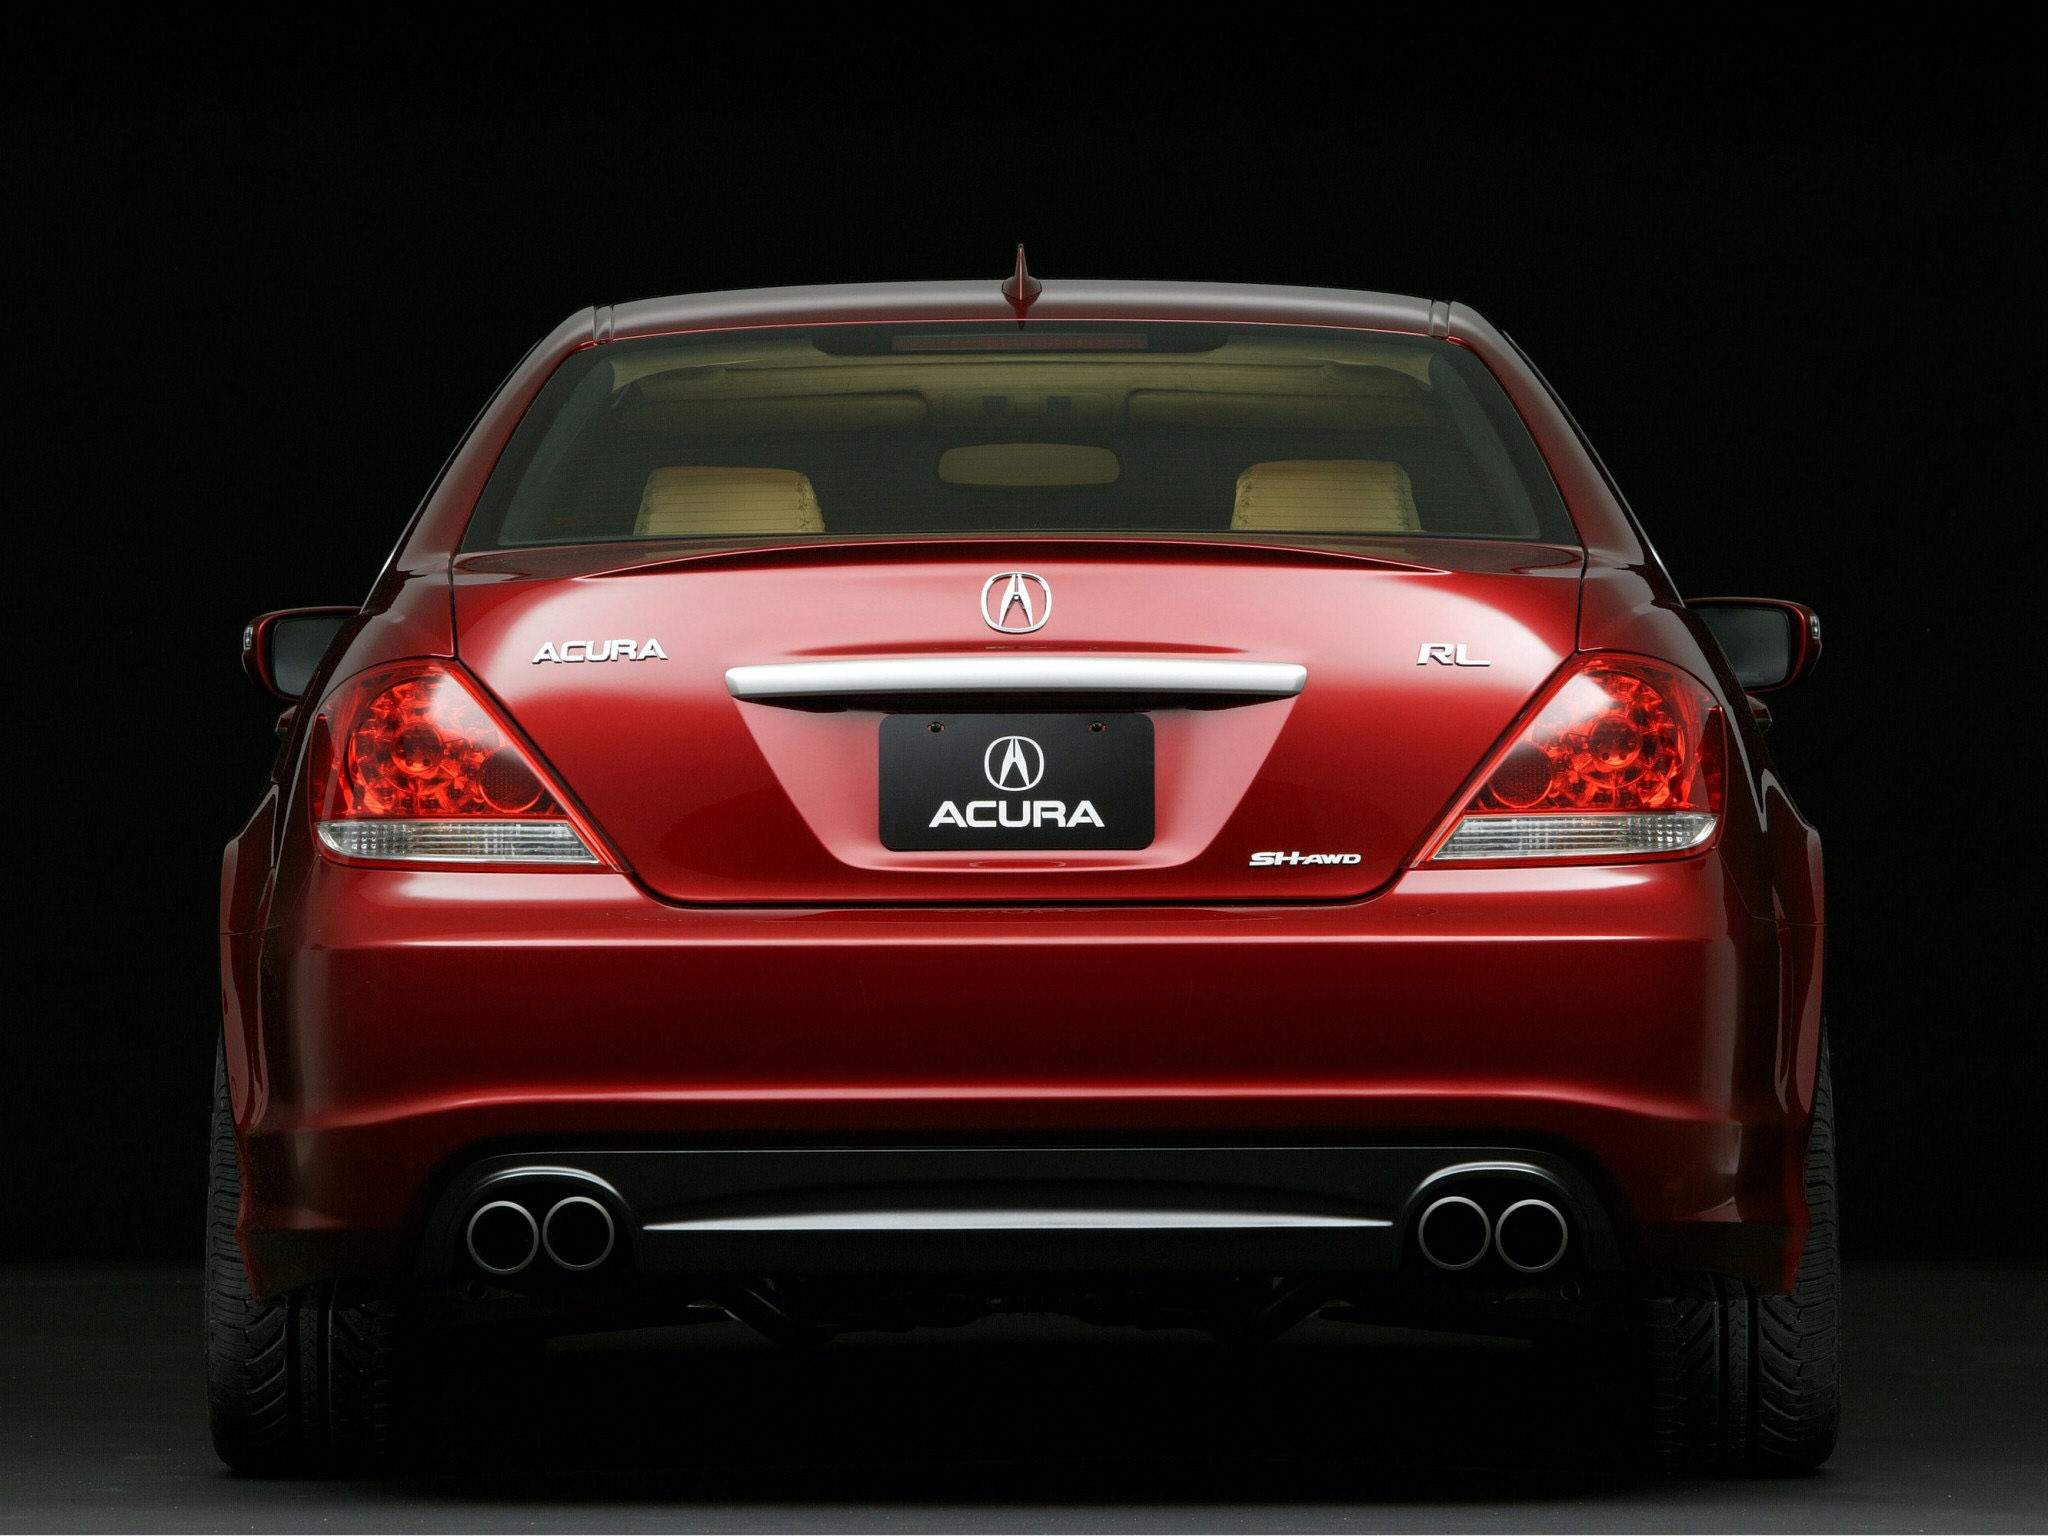 auto, acura, cars, red, concept, back view, rear view, style, 2005, akura, concept car, rl